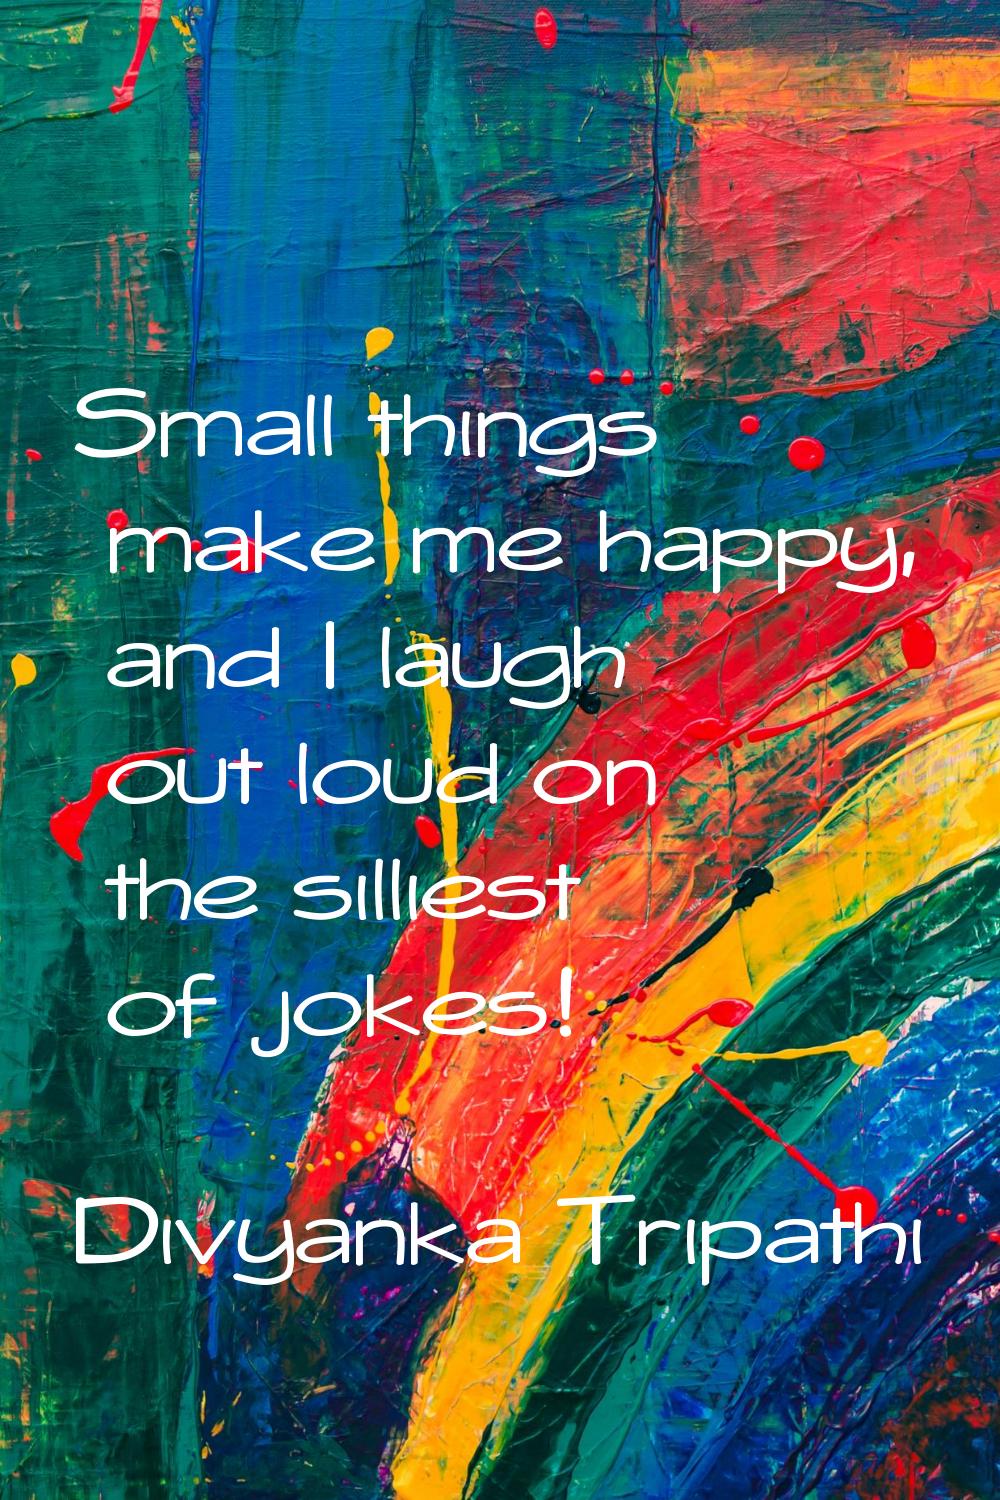 Small things make me happy, and I laugh out loud on the silliest of jokes!